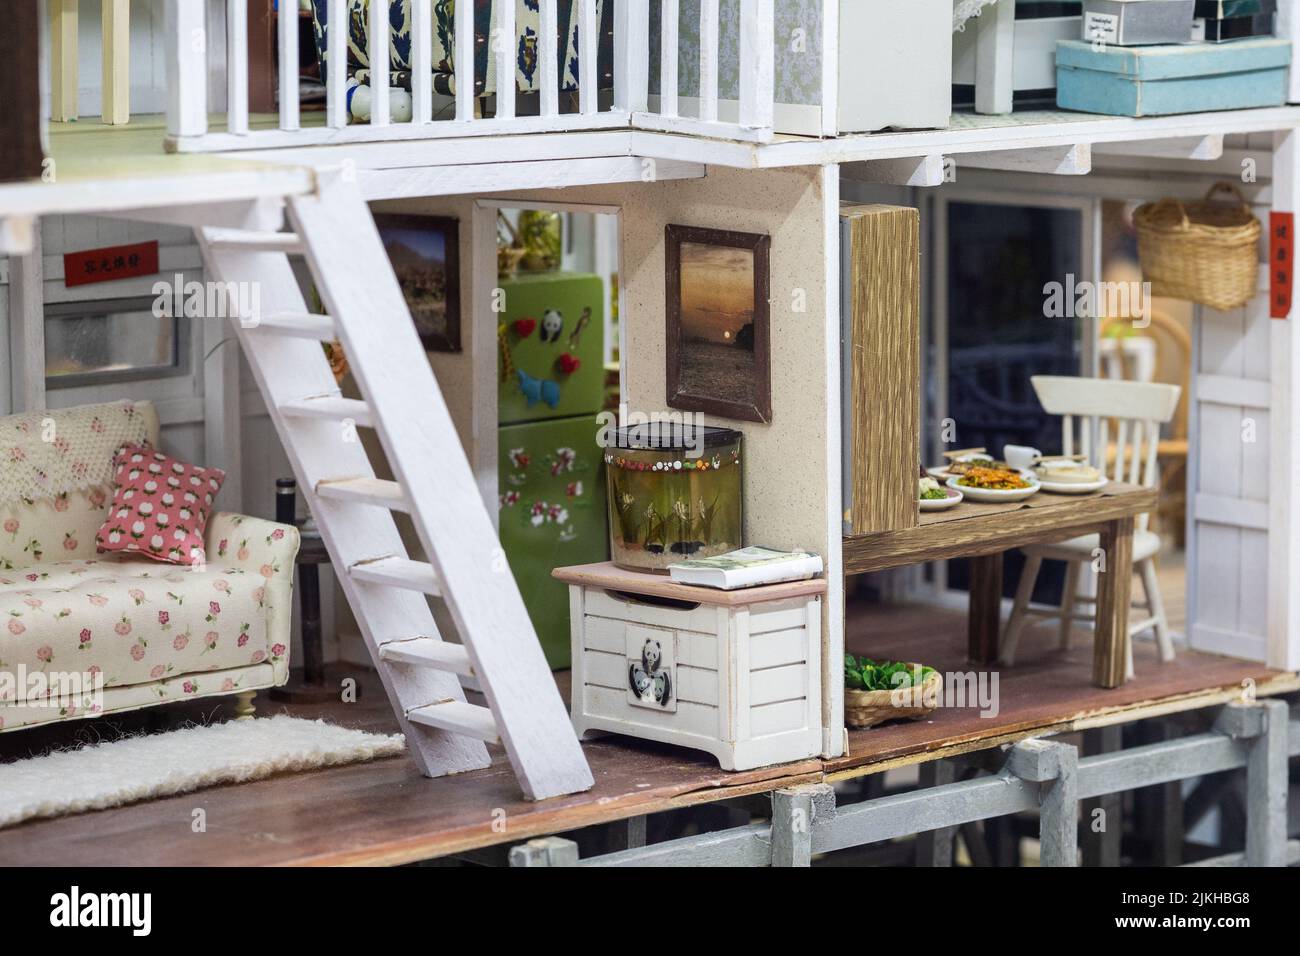 A miniature exhibition design of a cute toy house with decorations Stock Photo